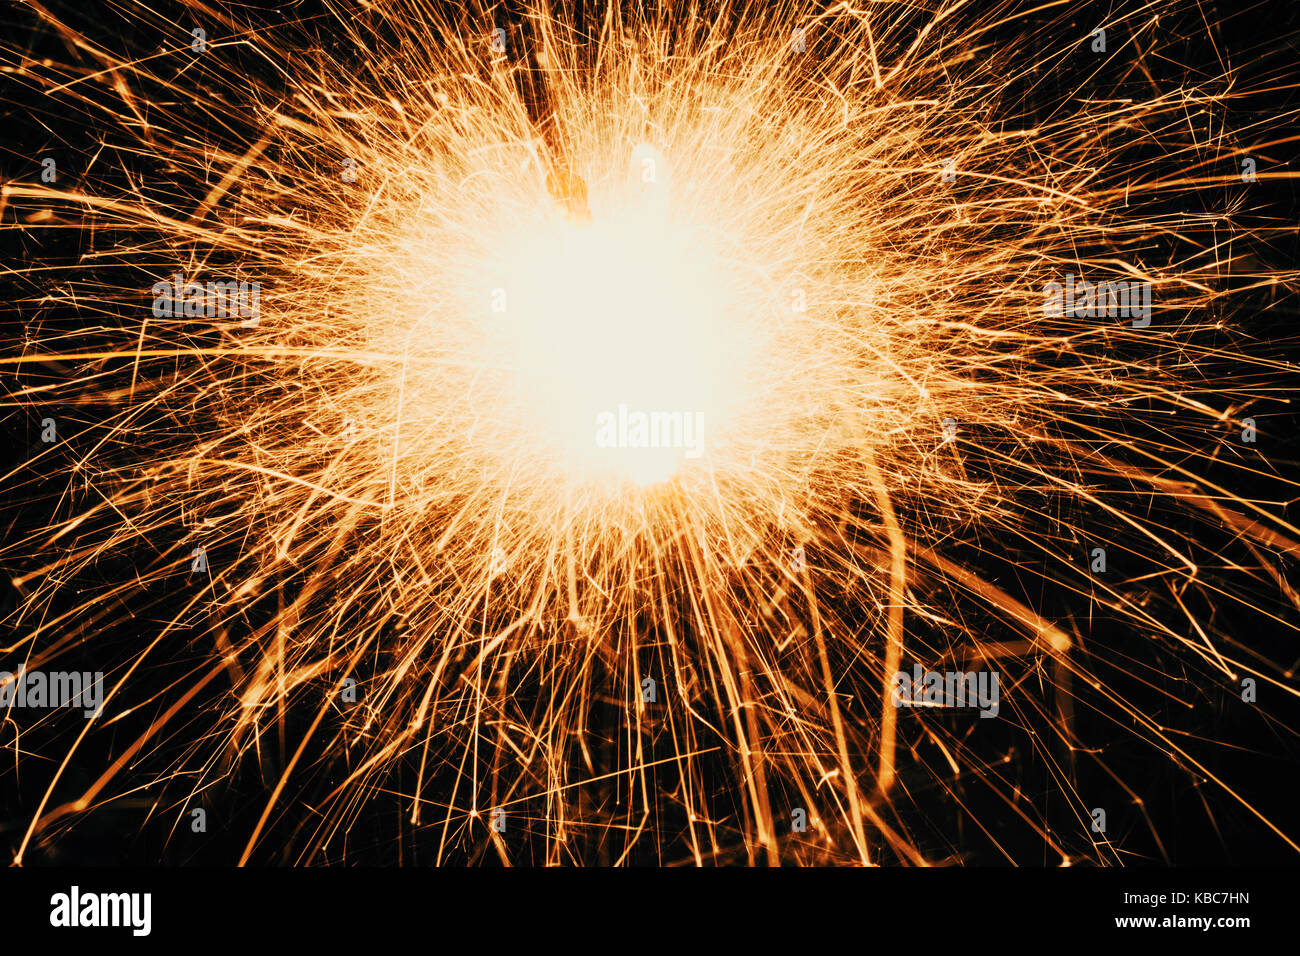 Close-Up Of Sparkler During Night Stock Photo